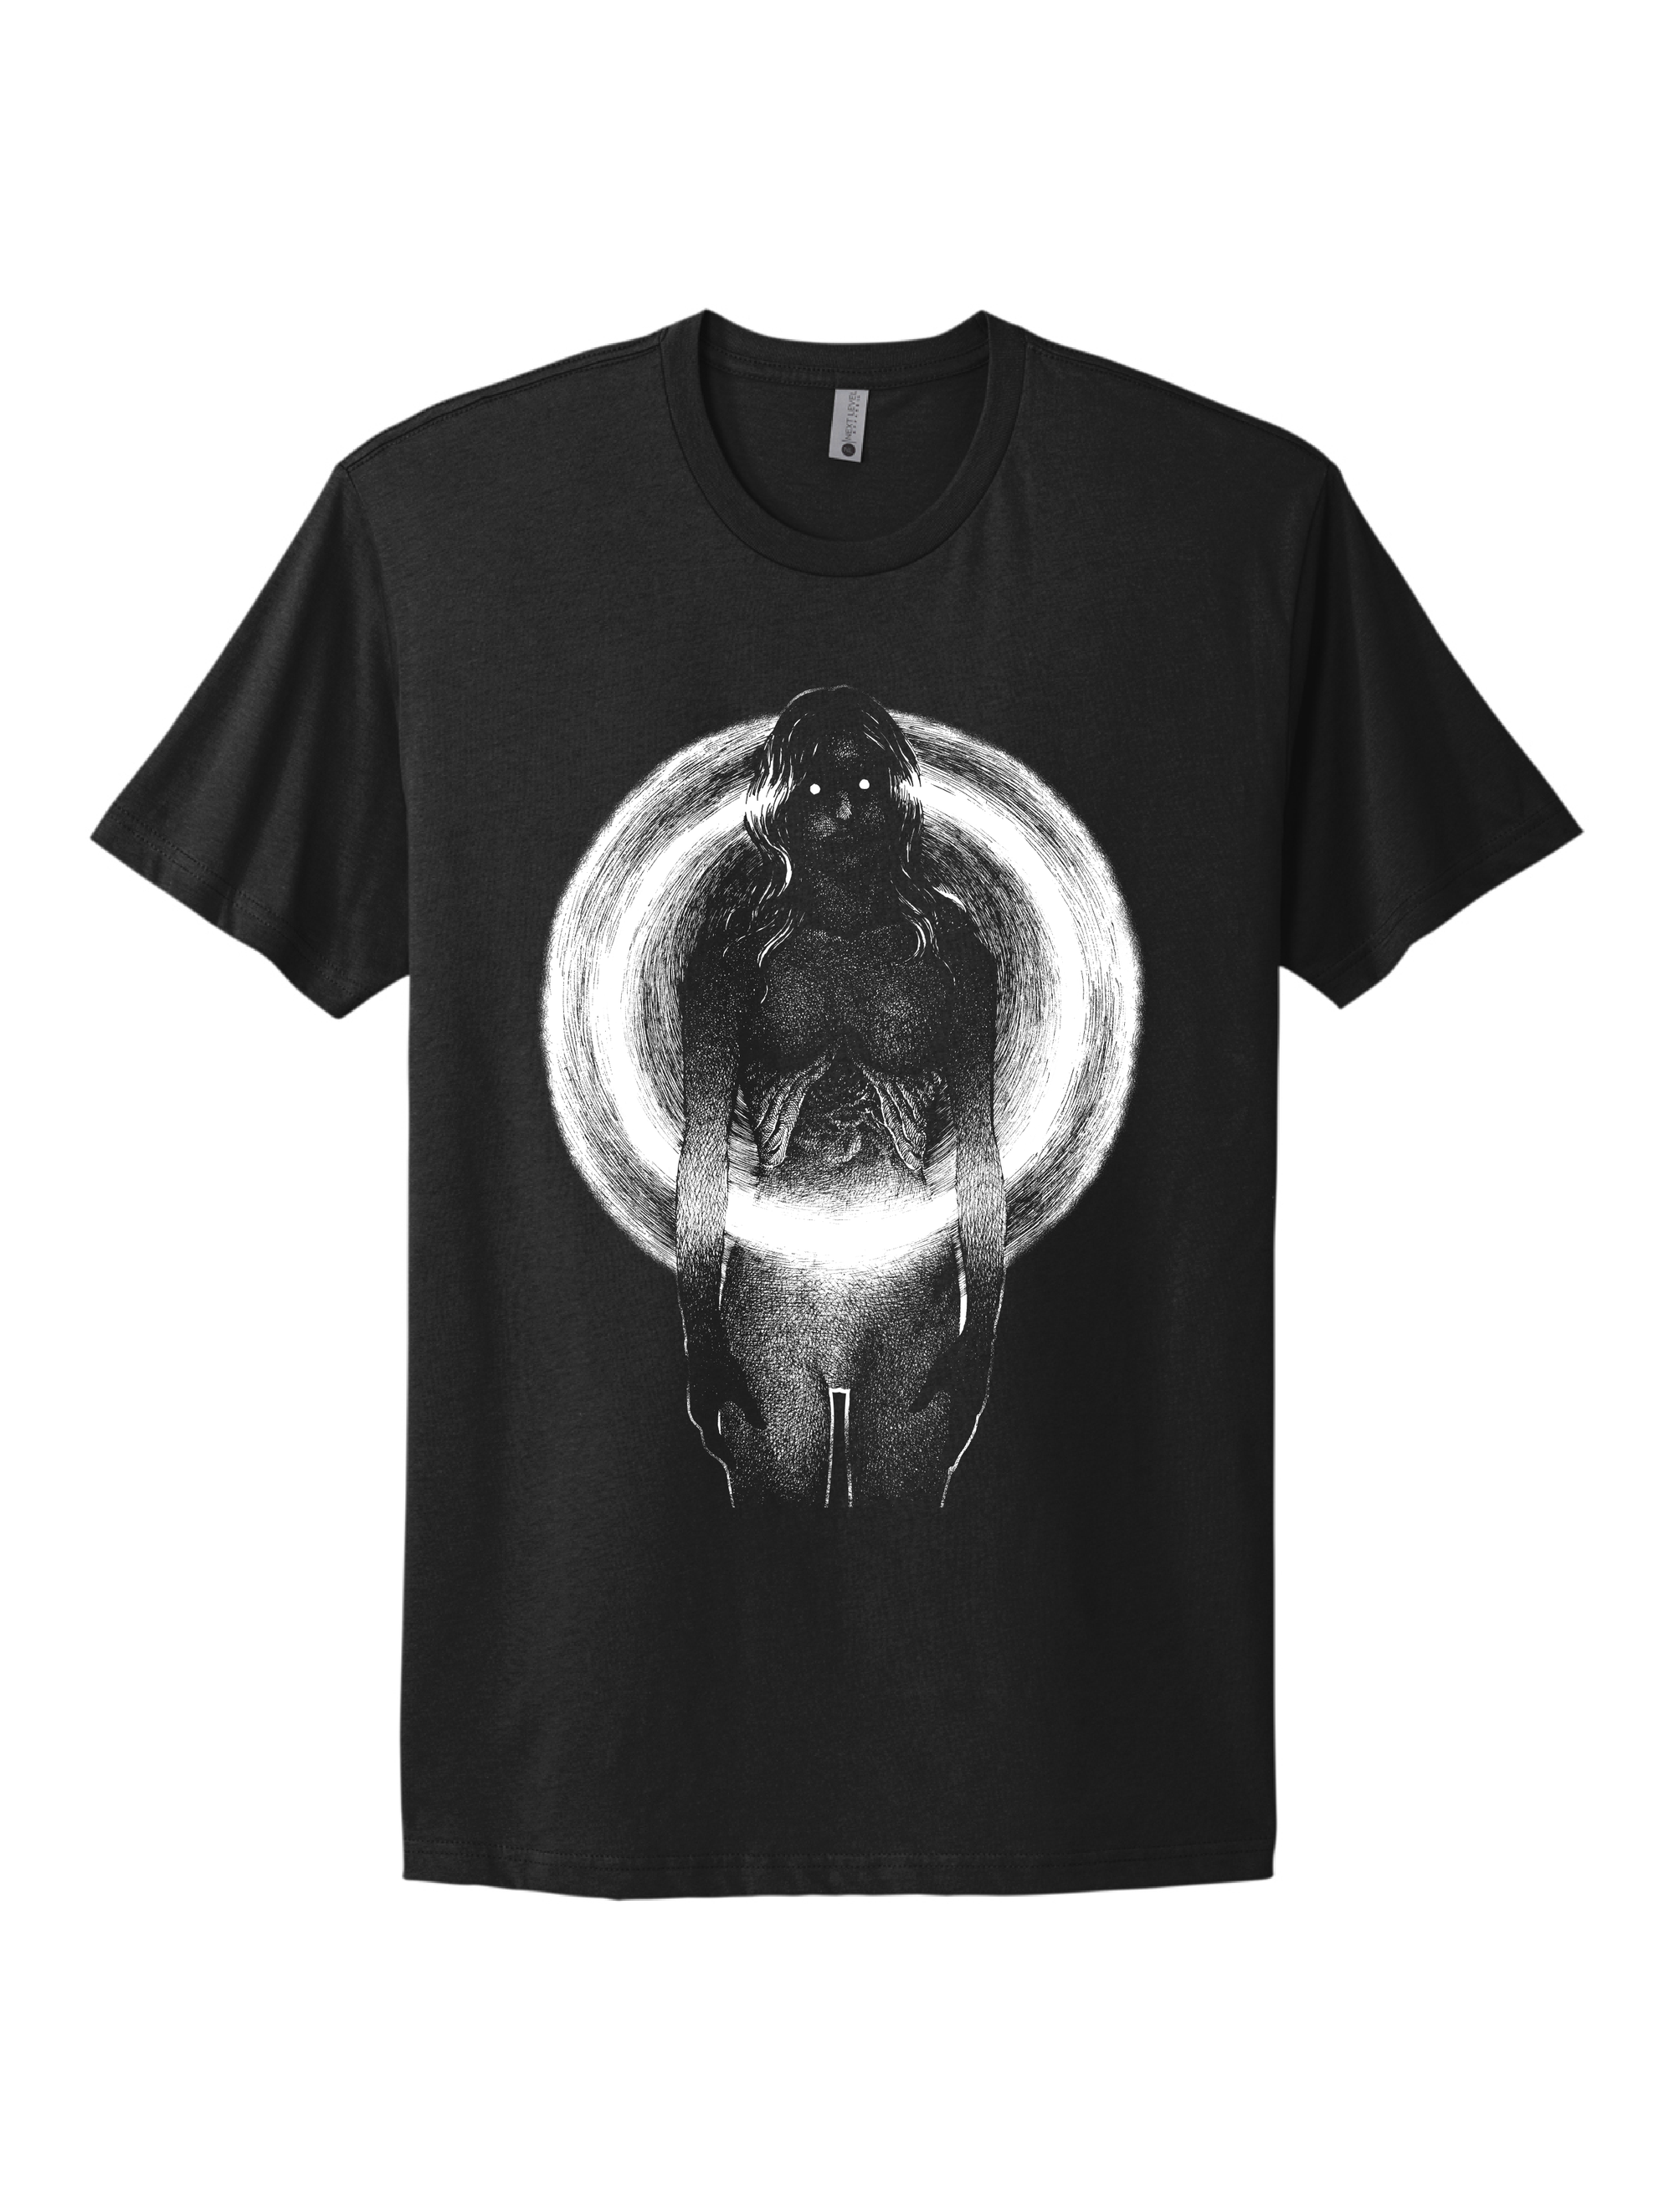 Black &amp; White image by Brandon Stewart of a creepy woman with her chest cavity exposed on a black short sleeve t-shirt